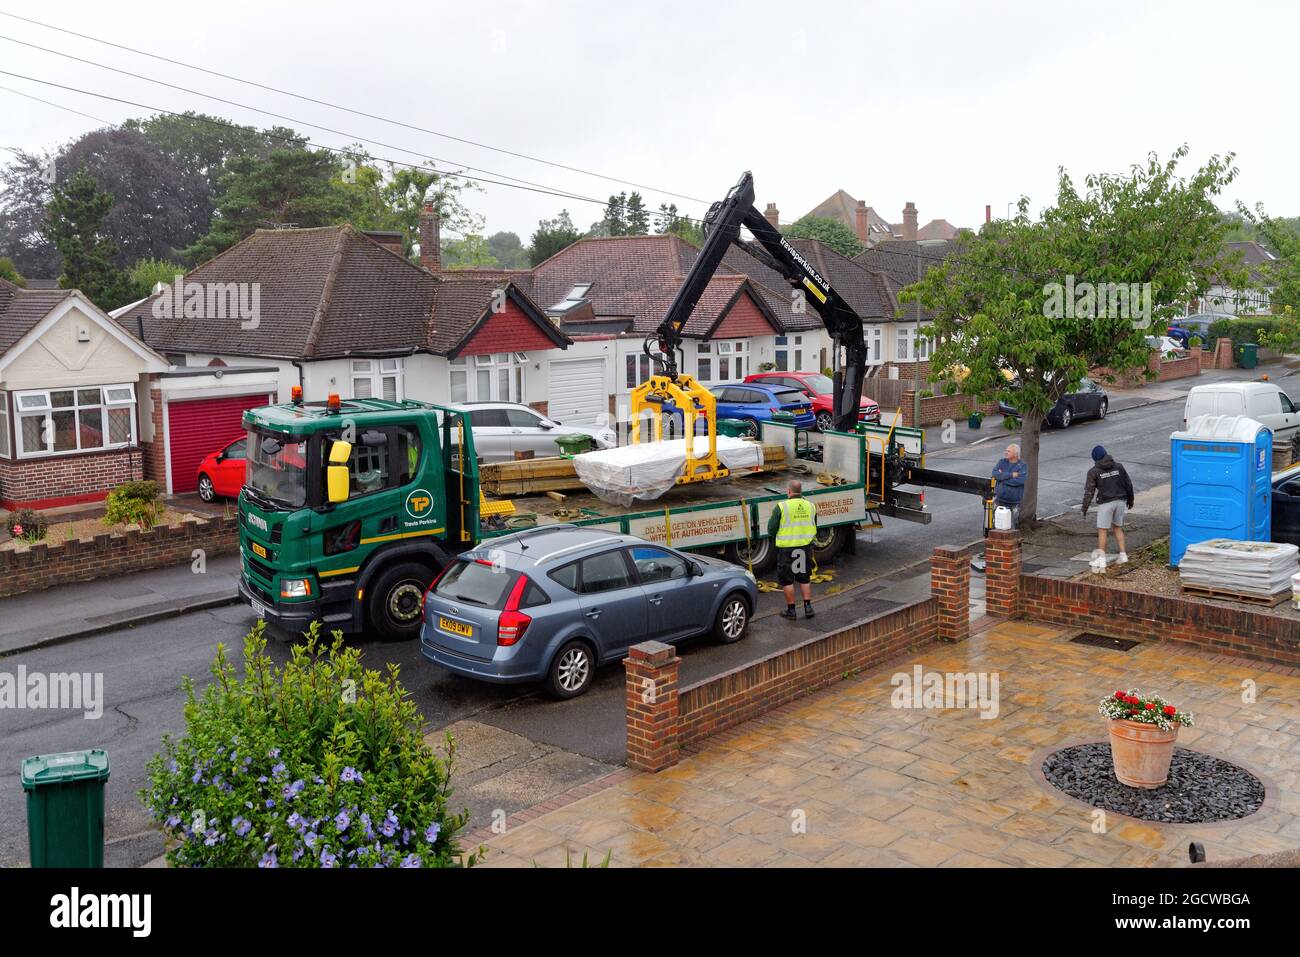 A  Travis Perkins flatbed lorry delivering building materials to a suburban house in Shepperton Surrey England UK Stock Photo